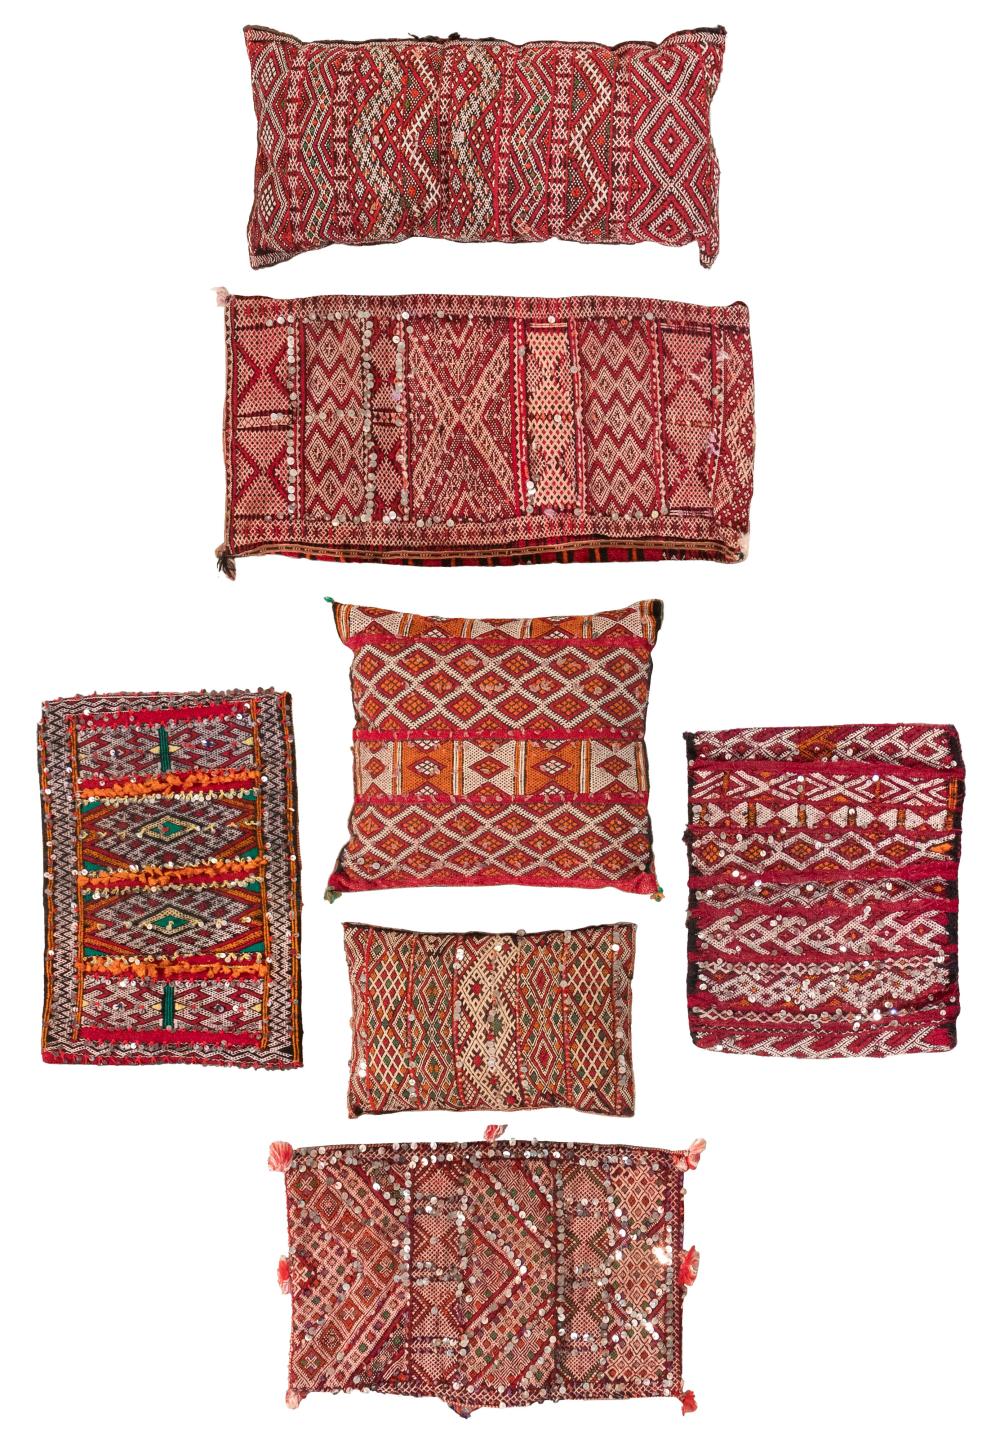 SEVEN MOROCCAN STORAGE BAGS FROM